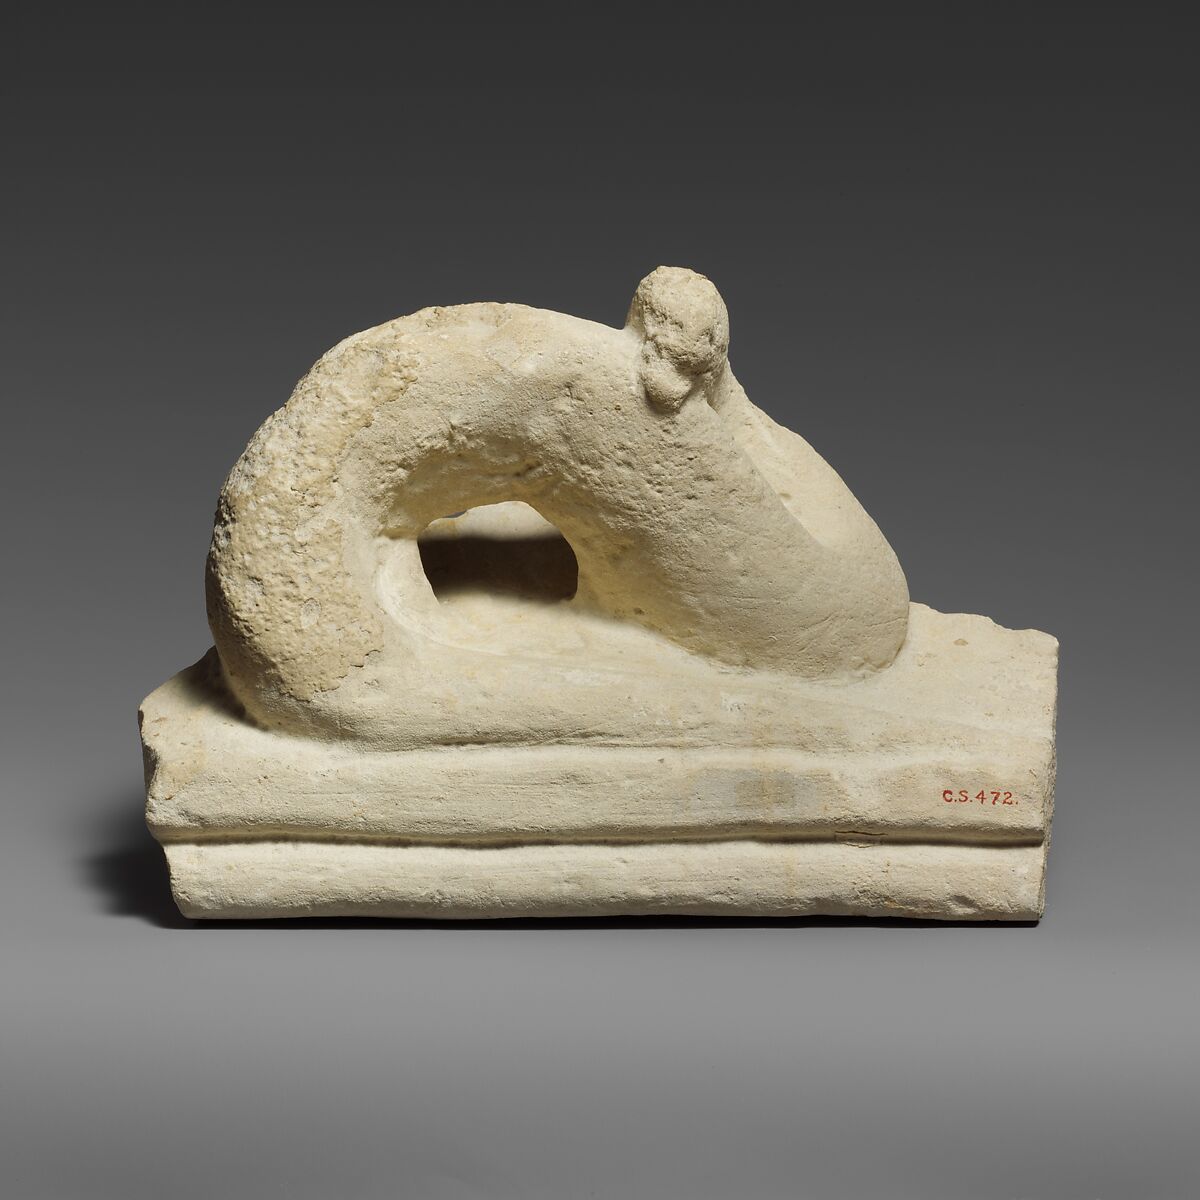 Two fragments of a limestone sarcophagus lid with snakes, Limestone, Cypriot 